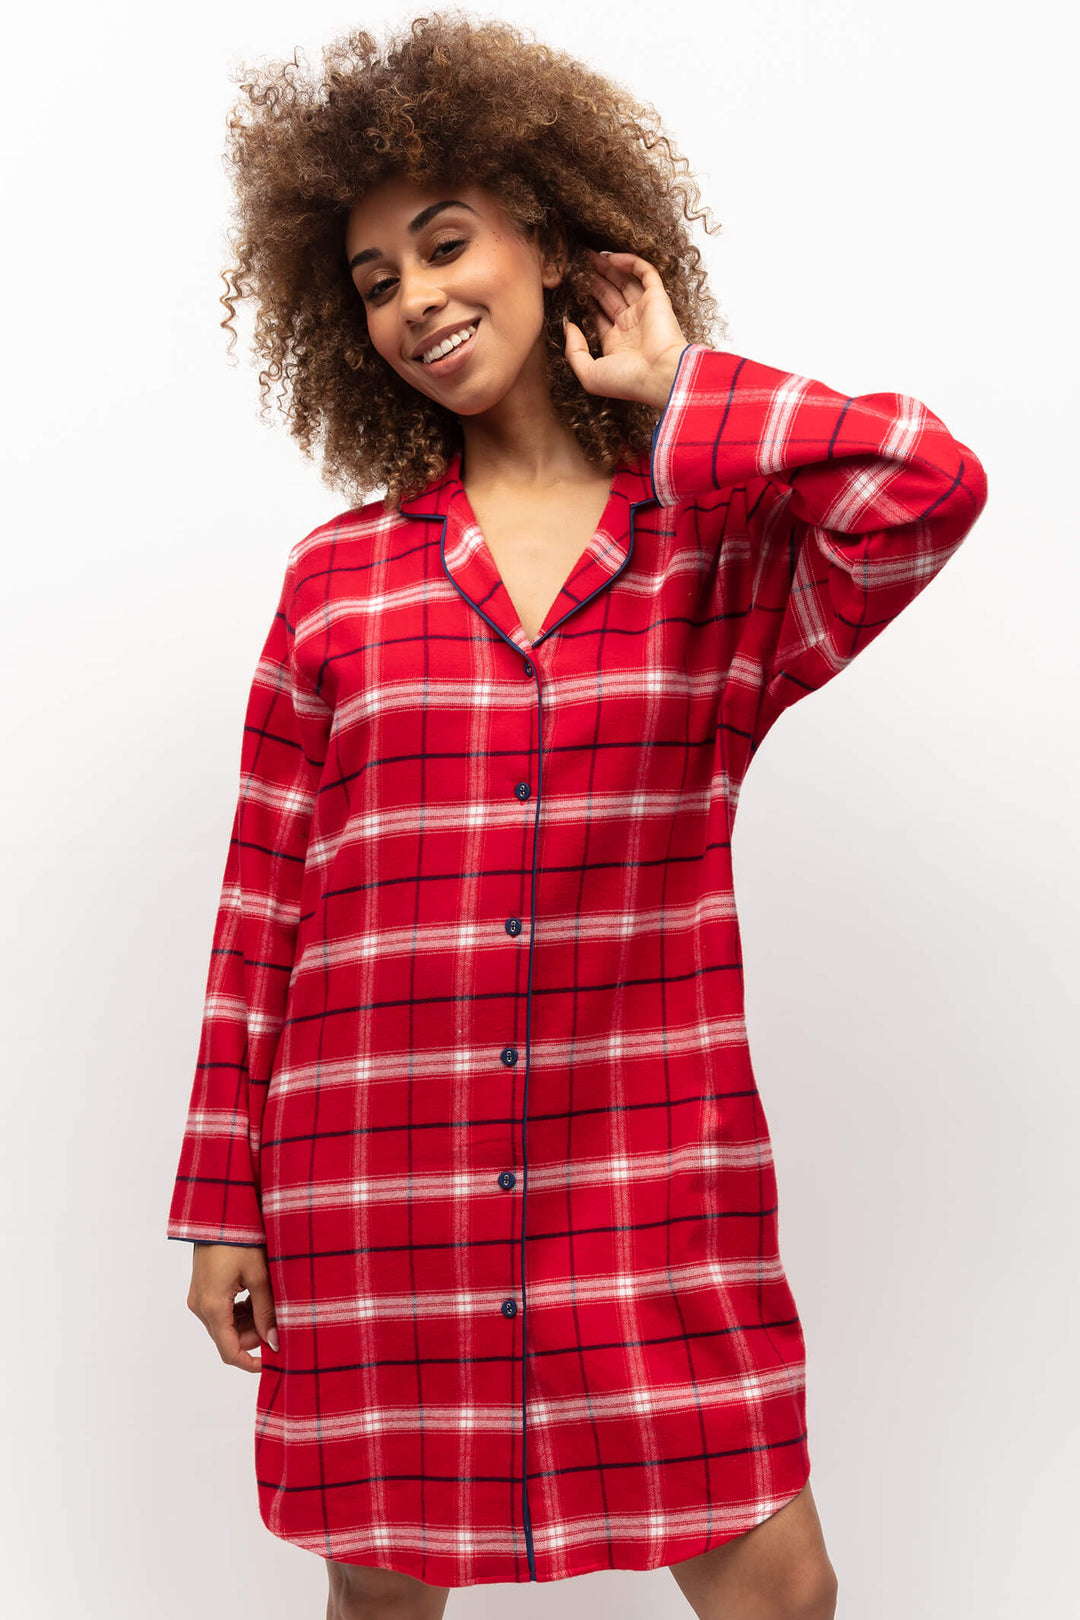 Cyberjammies 9884 Noel Super Cosy Red Check Long Sleeve Nightshirt - Shirley Allum Boutique